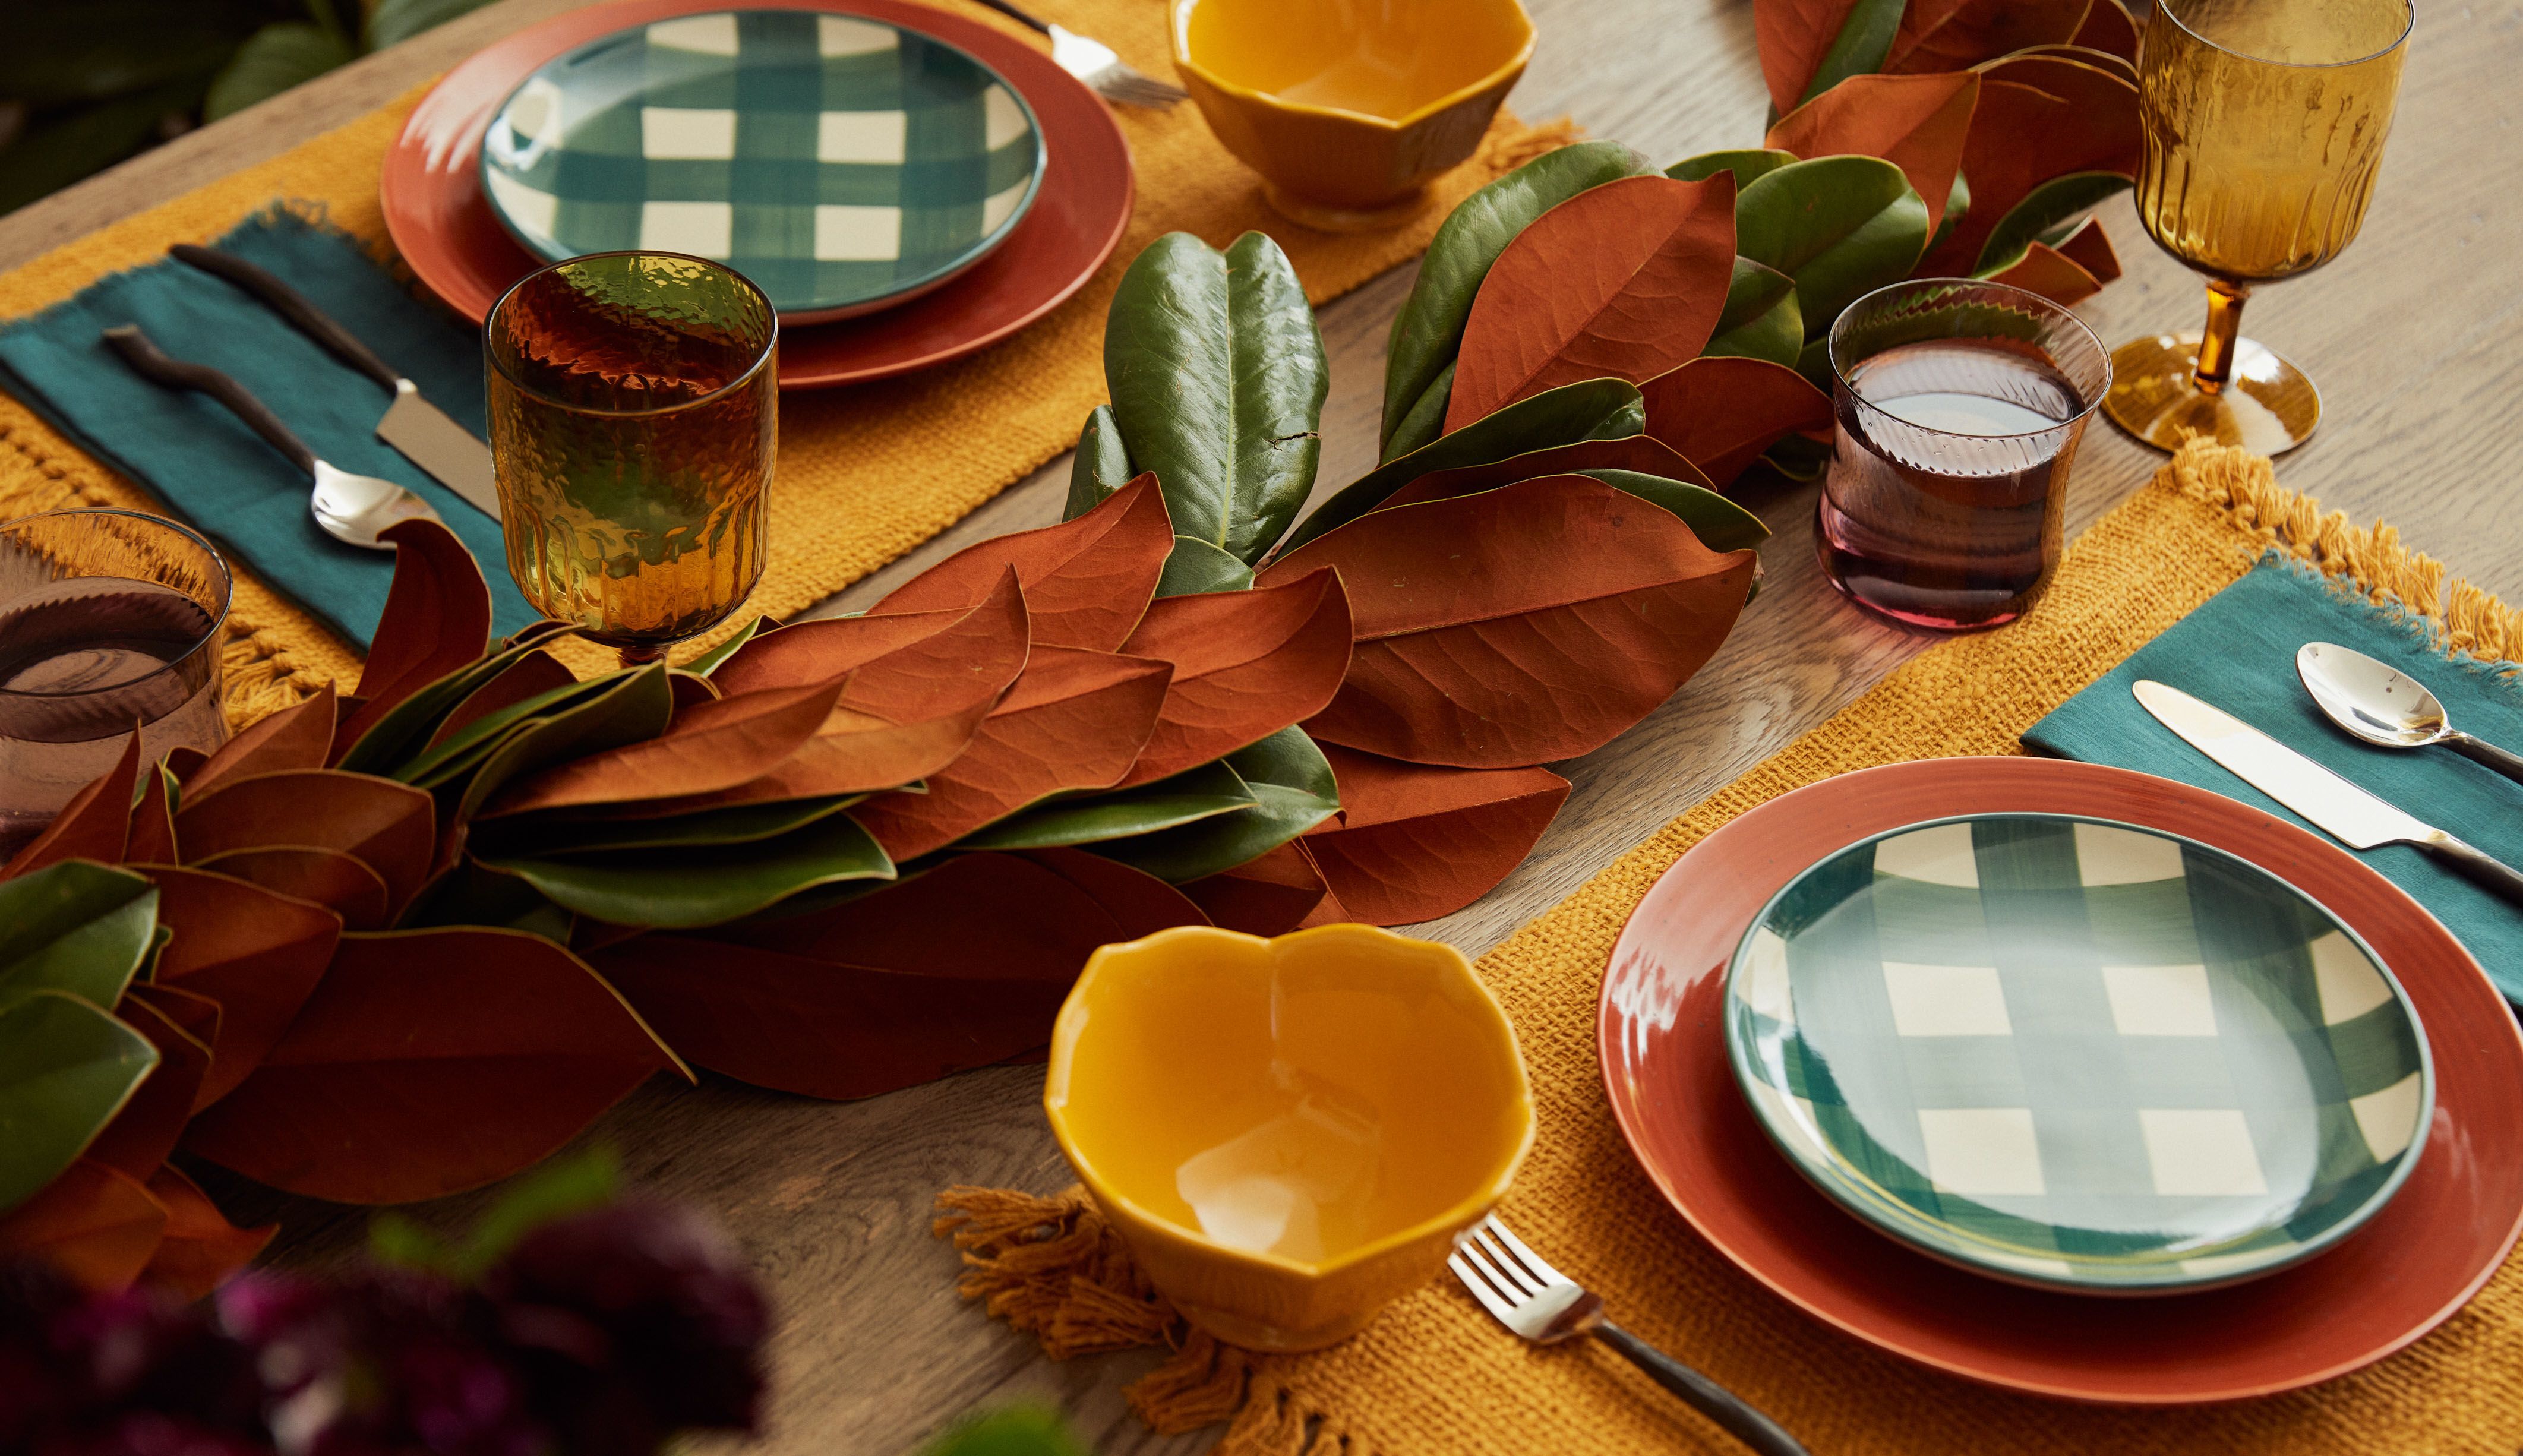 Table set for Thanksgiving with magnolia leaf runner centerpiece